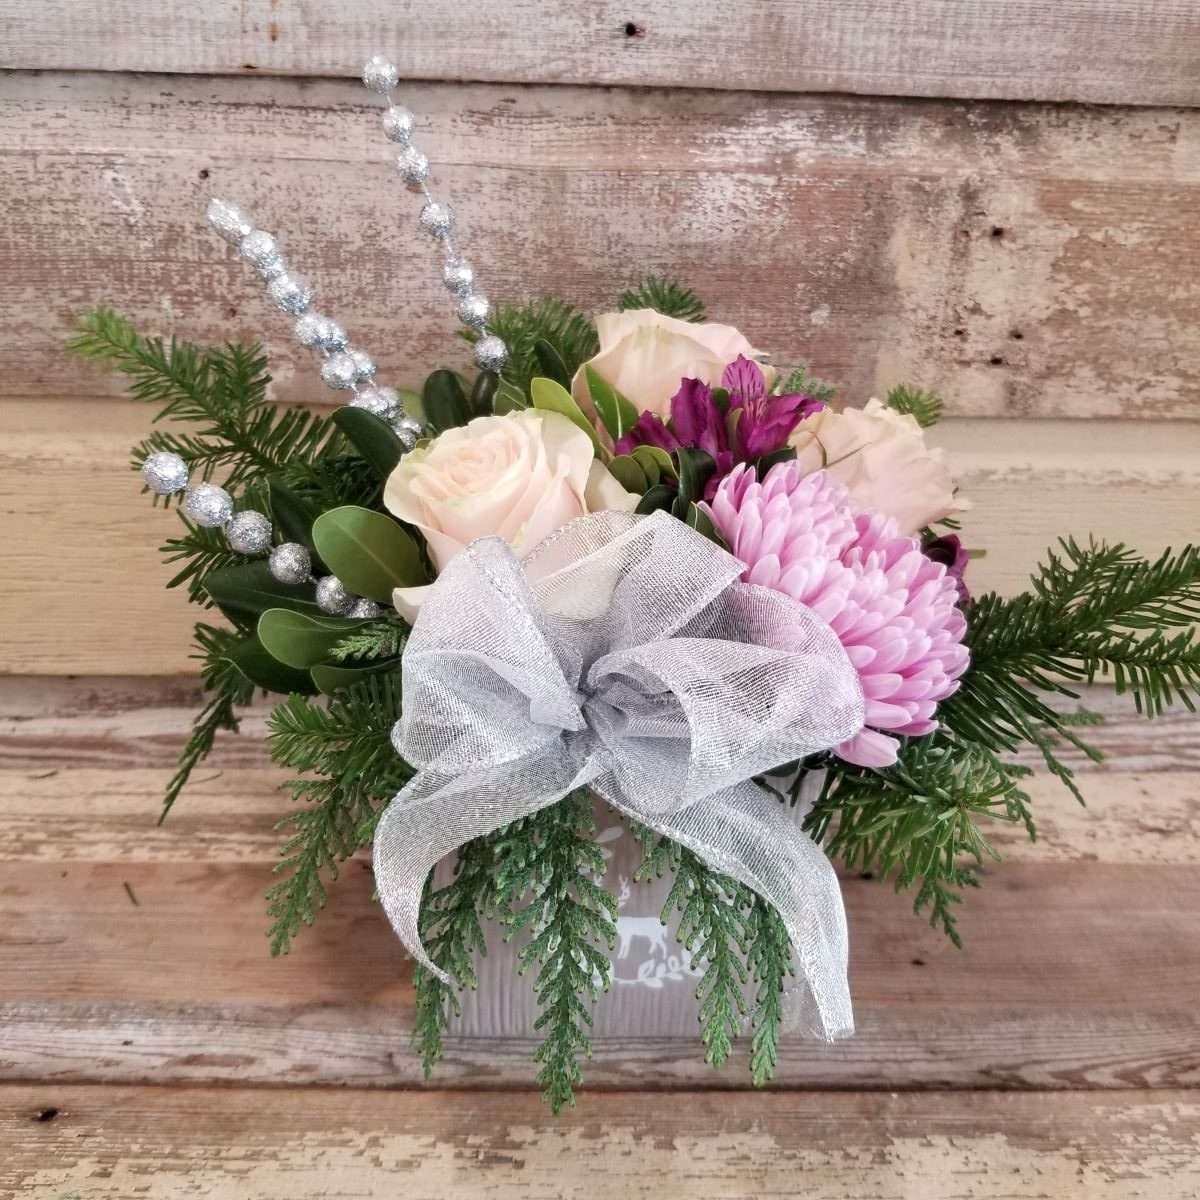 Silver and Purple Flower Arrangegment for christmas or winter